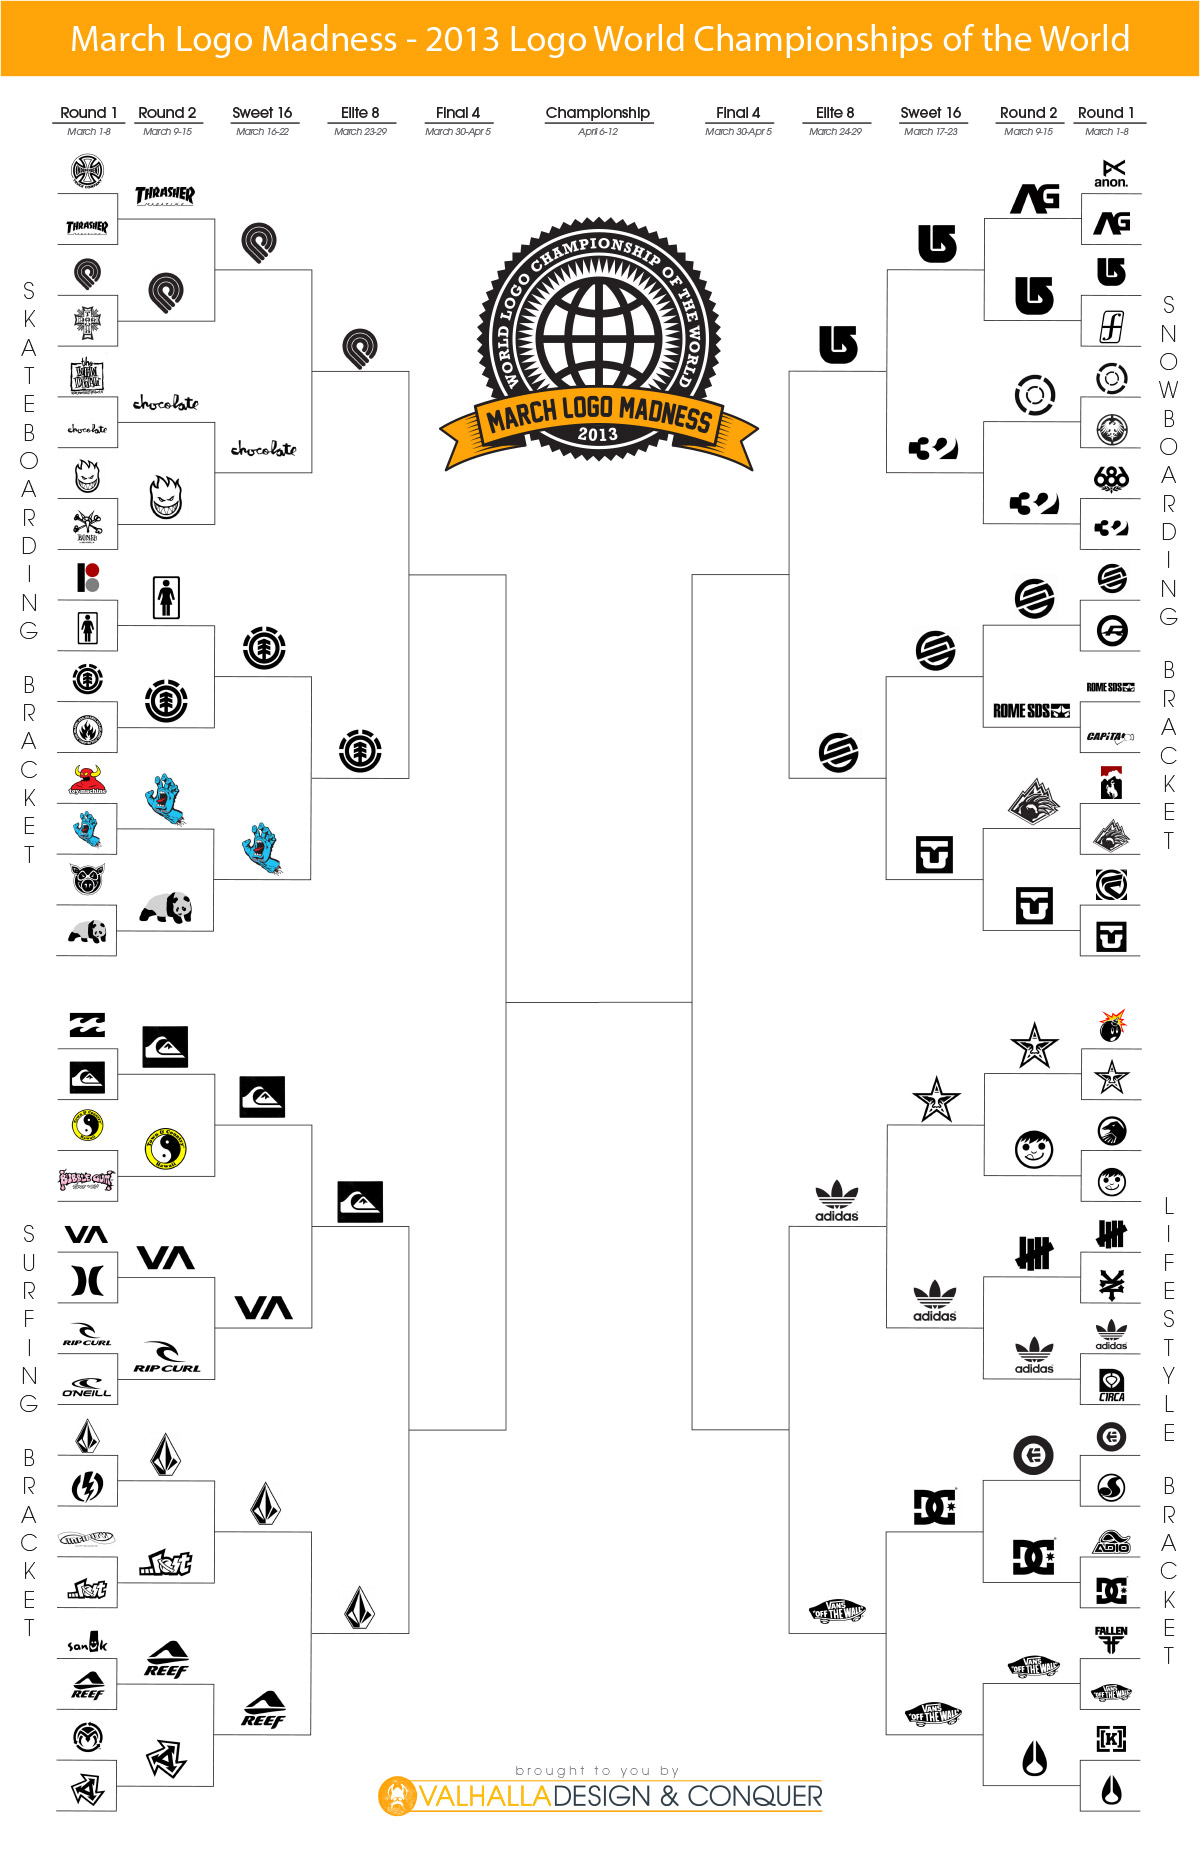 Finale_Logos_Madness